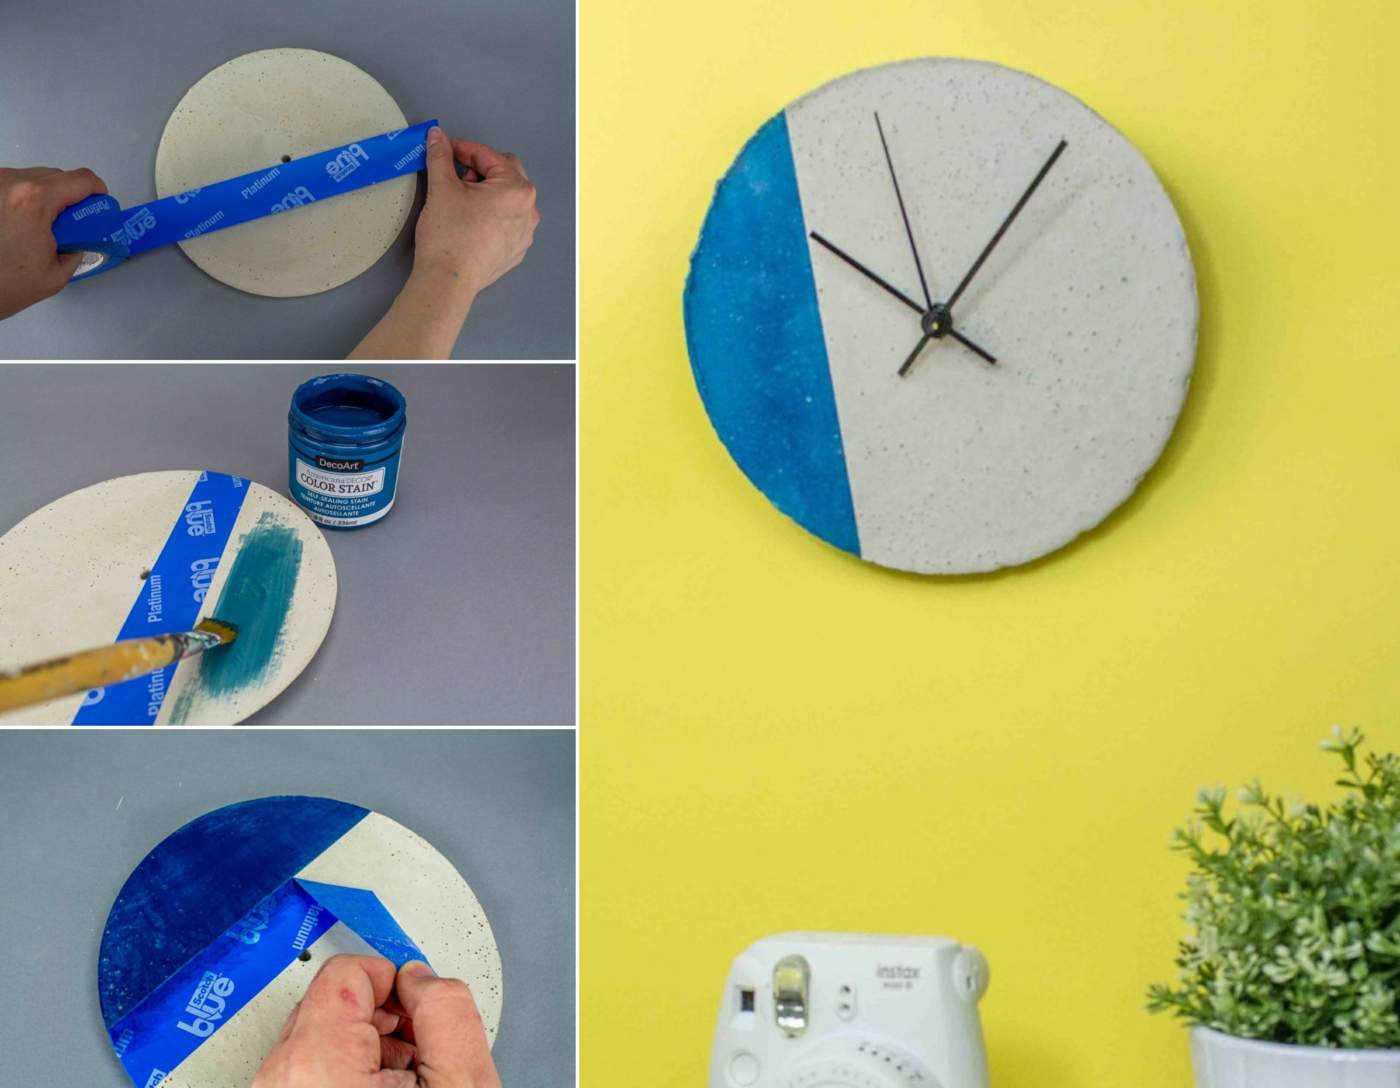 Guide to making concrete and paint for a minimalist DIY wall clock